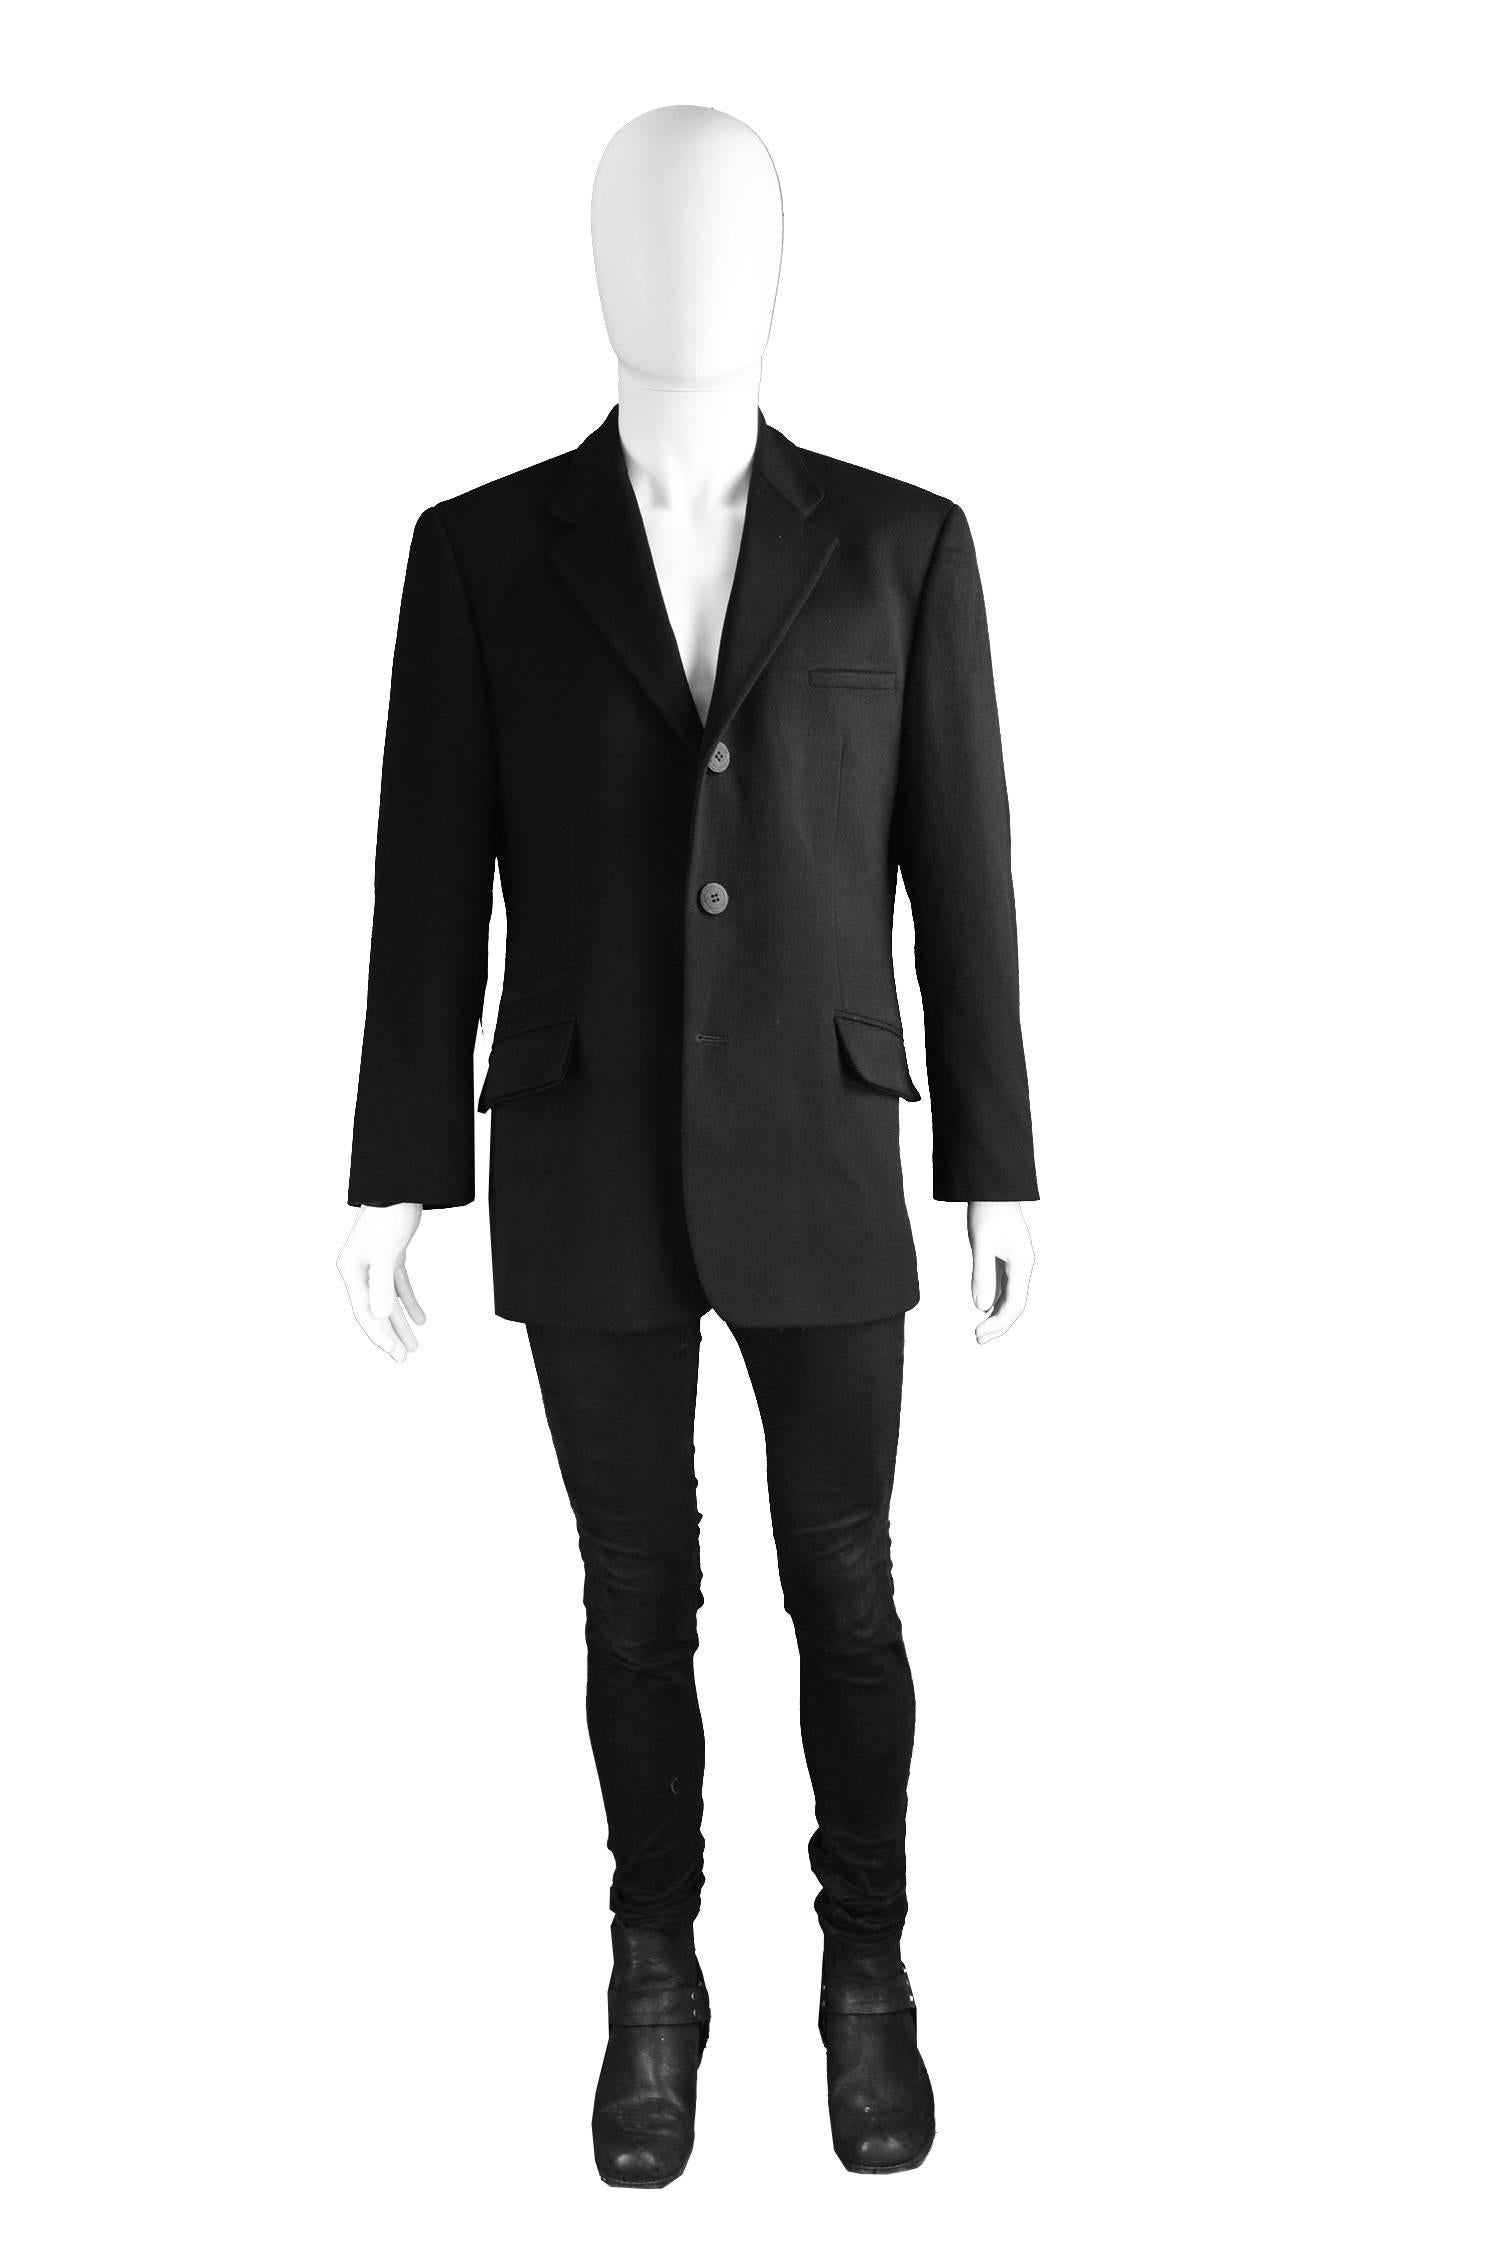 Istante by Gianni Versace Men's Vintage Cashmere, Wool and Velvet Blazer, 1990s

Size: Marked L / 50. Please check measurements
Chest - 44” / 112cm (please allow a couple of inches room for movement)
Length (Shoulder to Hem) - 29” / 73cm
Shoulder to